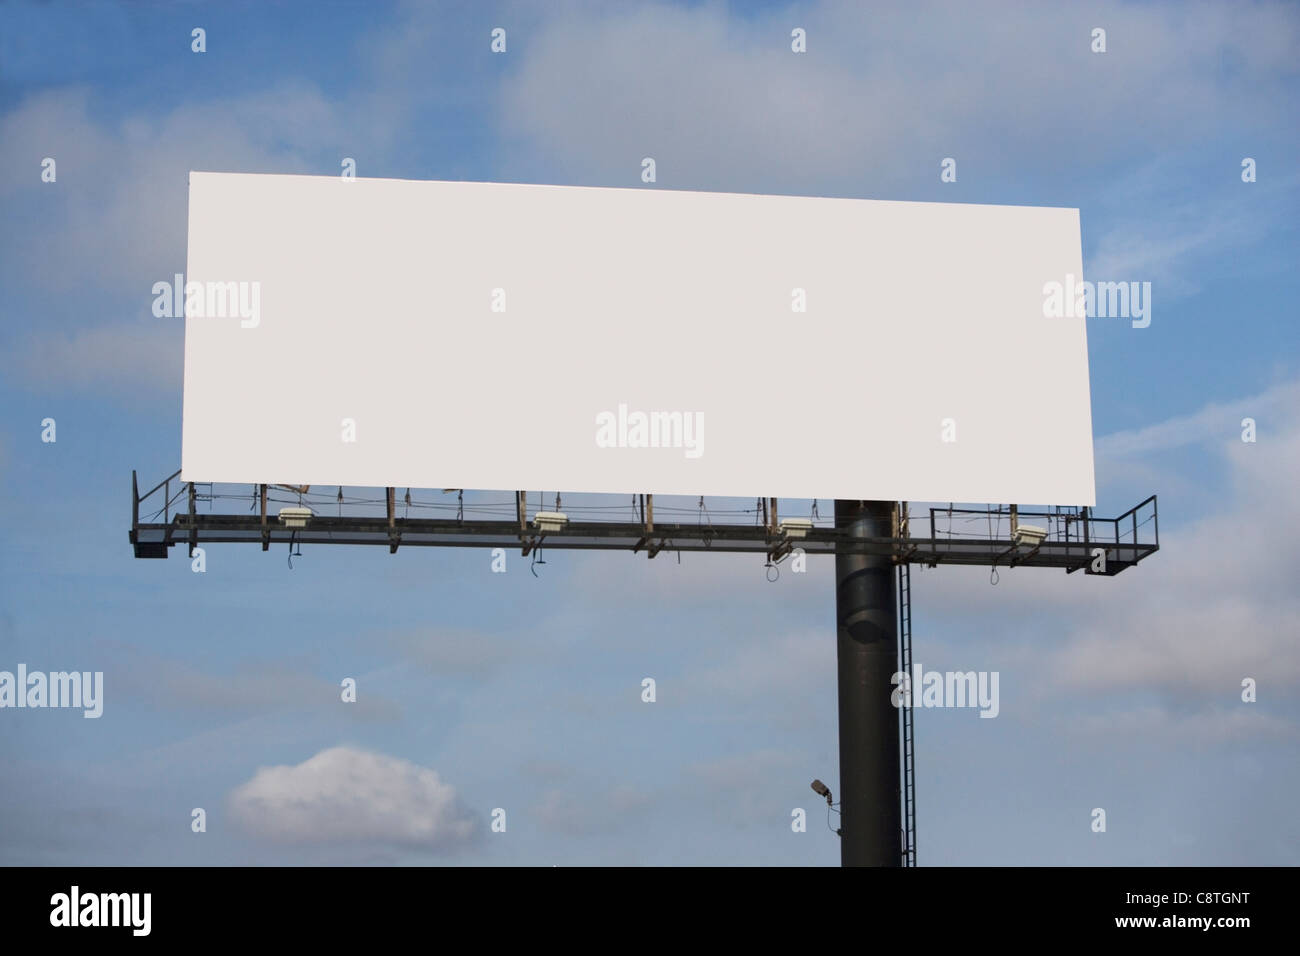 USA, New York State, Blank billboard Banque D'Images